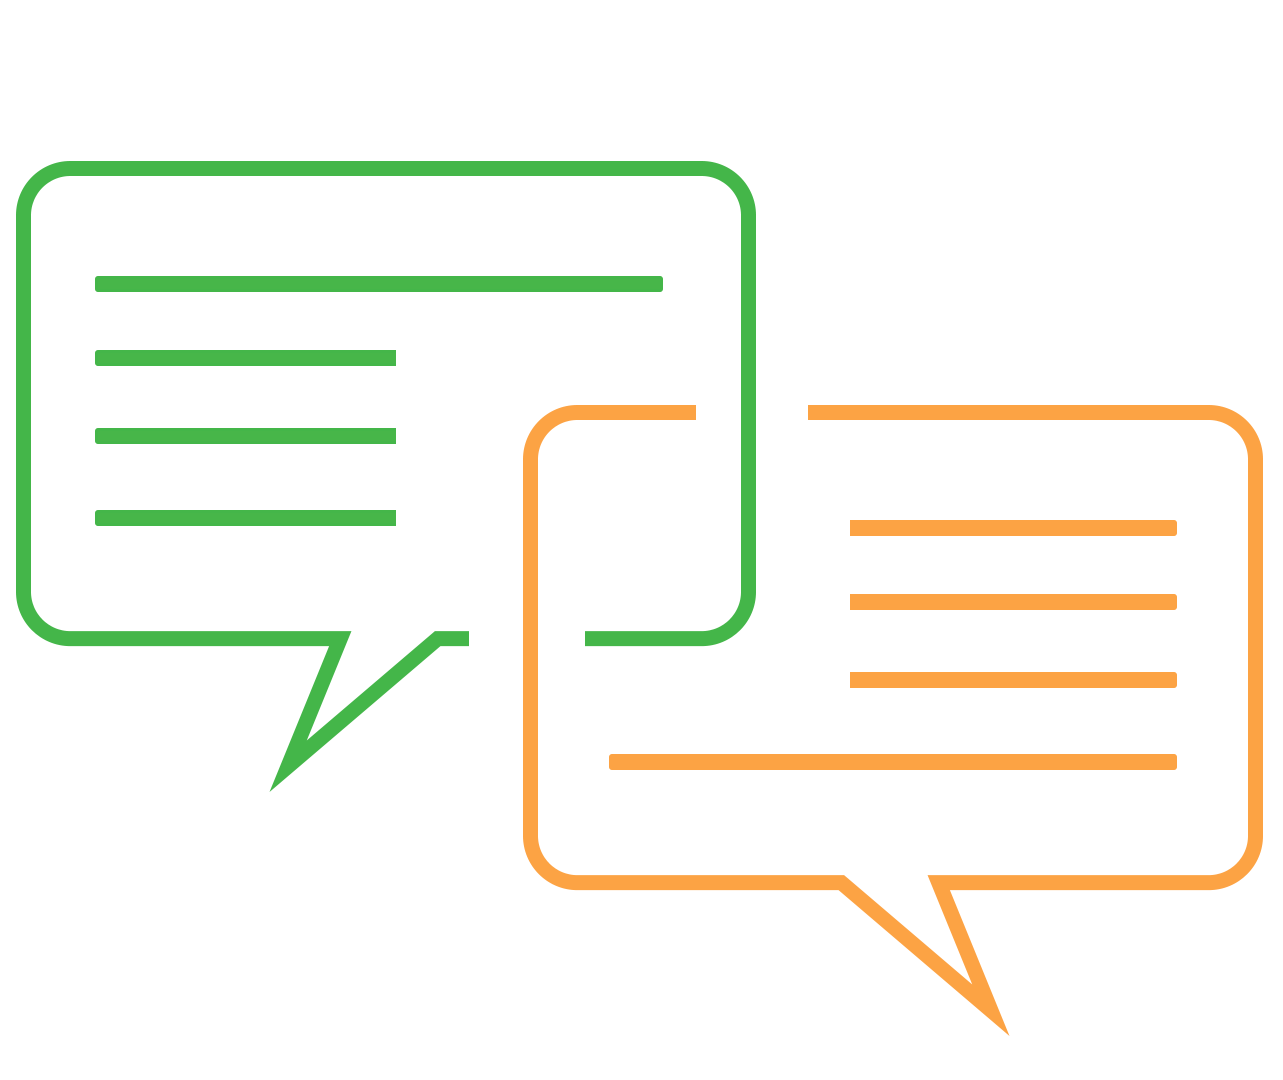 illustration of two speech bubbles representing communication